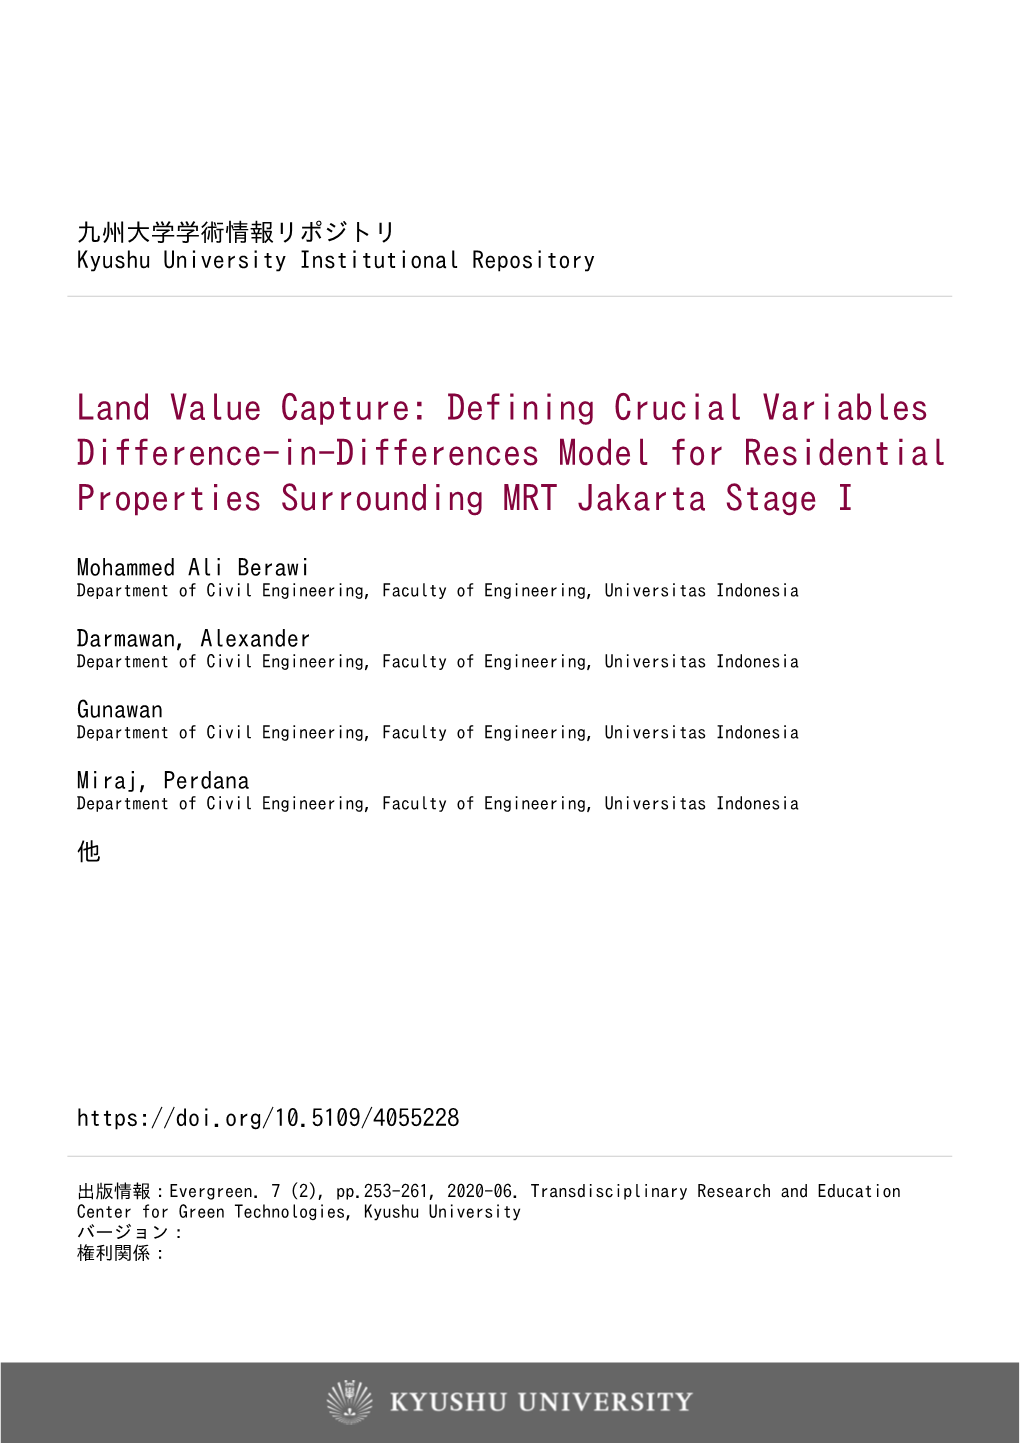 Land Value Capture: Defining Crucial Variables Difference-In-Differences Model for Residential Properties Surrounding MRT Jakarta Stage I